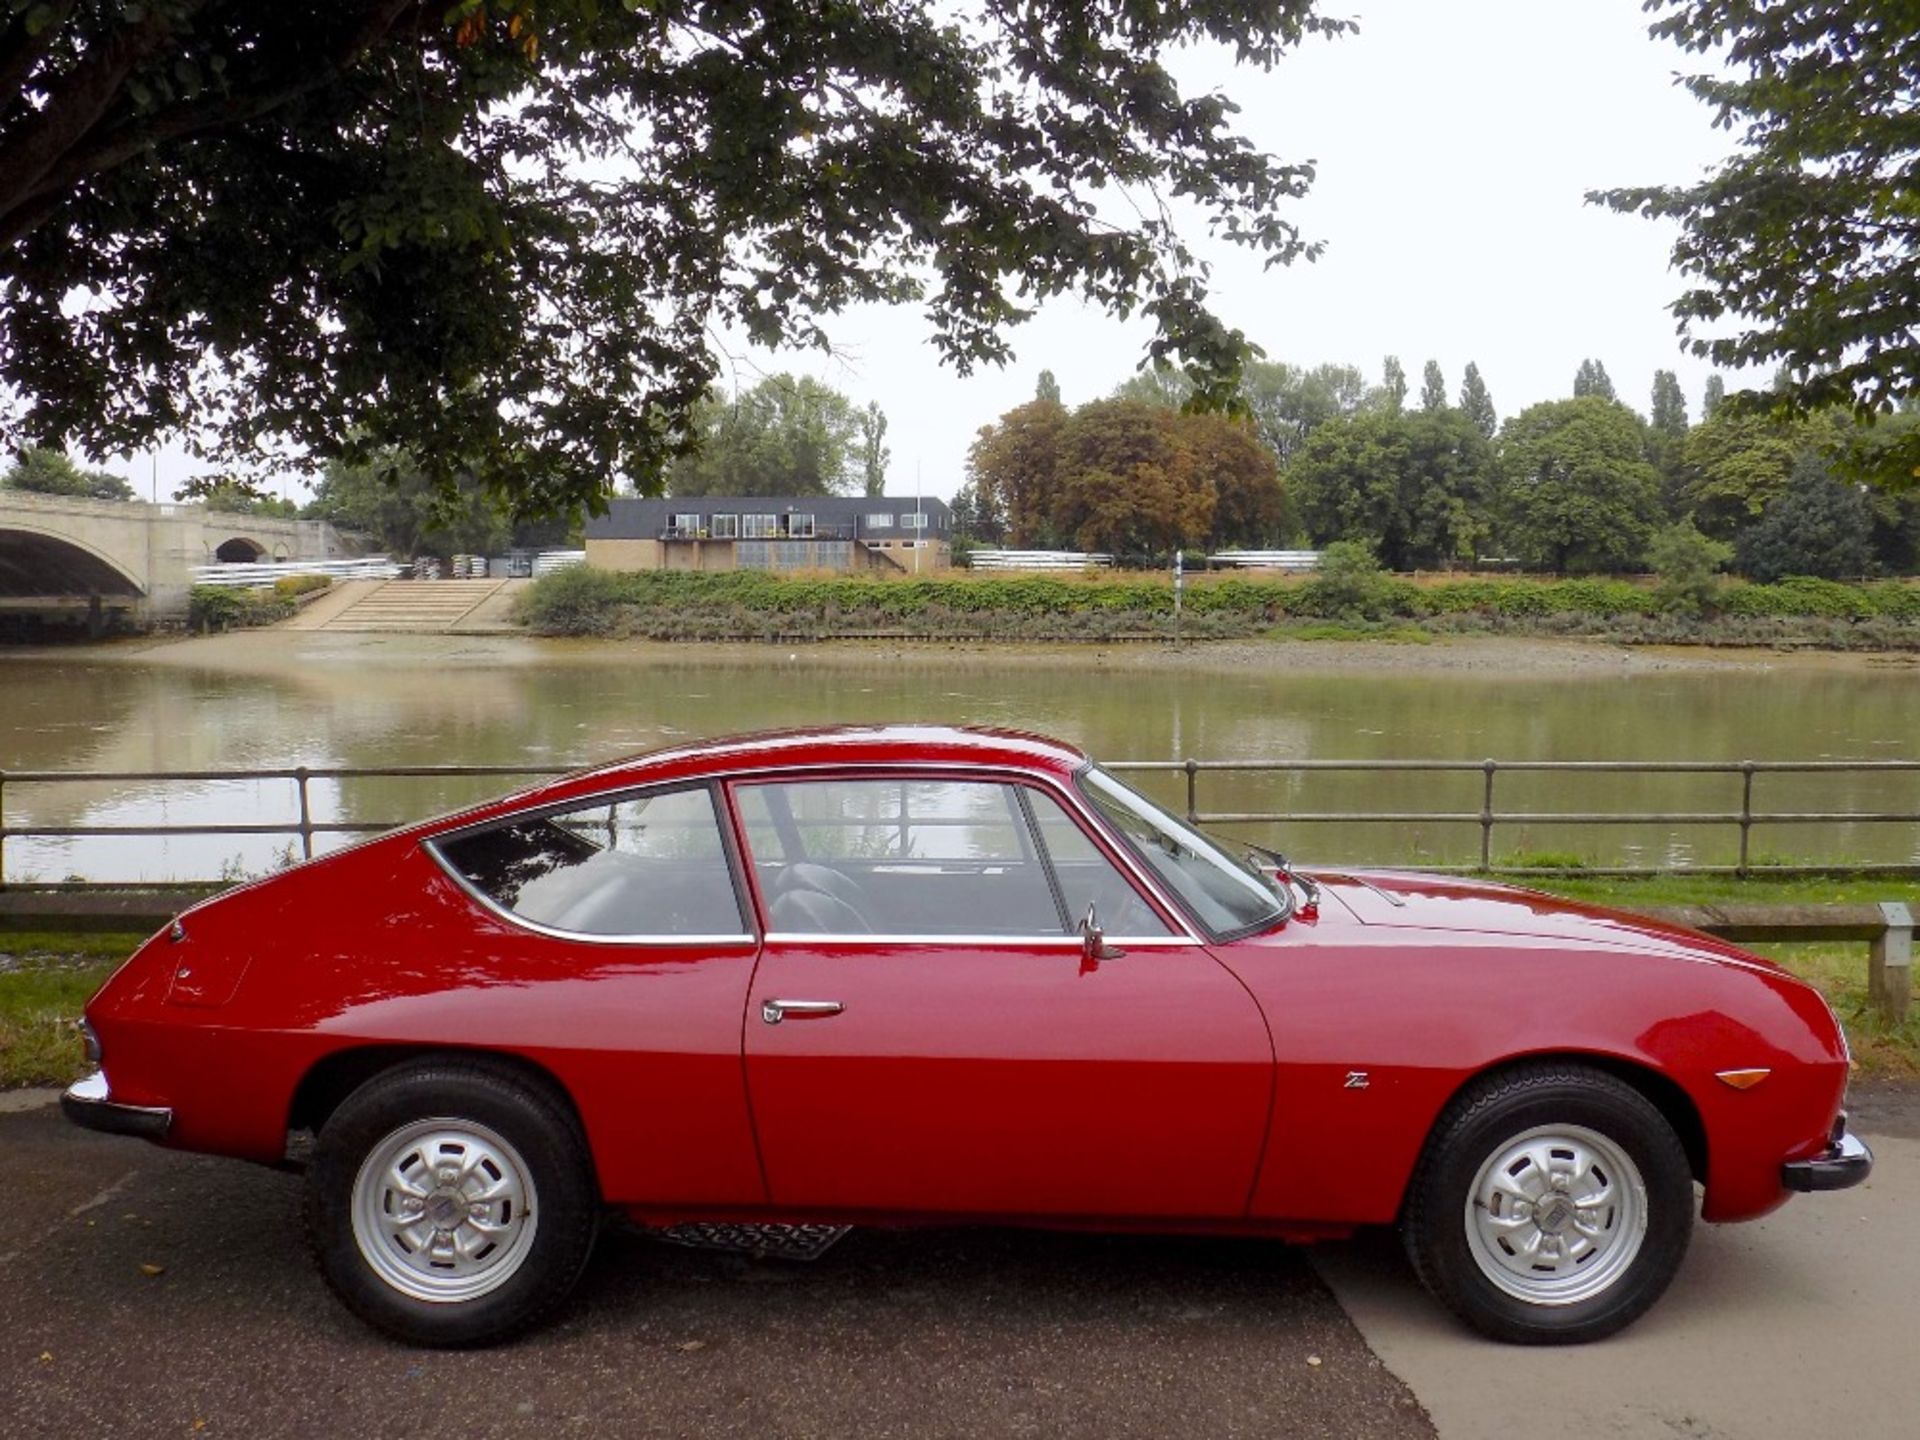 1972 LANCIA FULVIA SERIES II SPORT ZAGATO Registration Number: KKX 463L Chassis Number: 818.651.3066 - Image 7 of 28